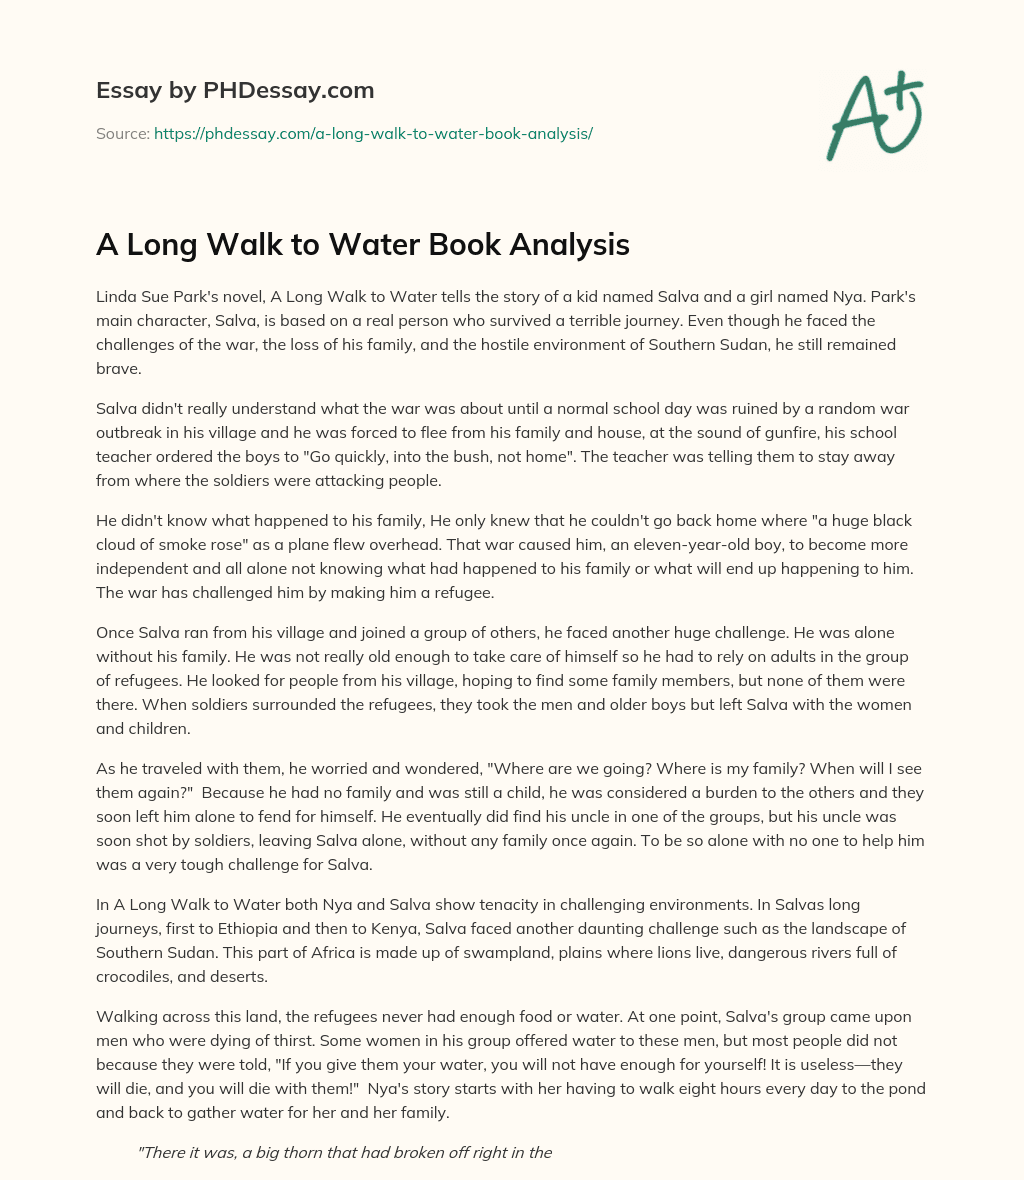 essay about a long walk to water